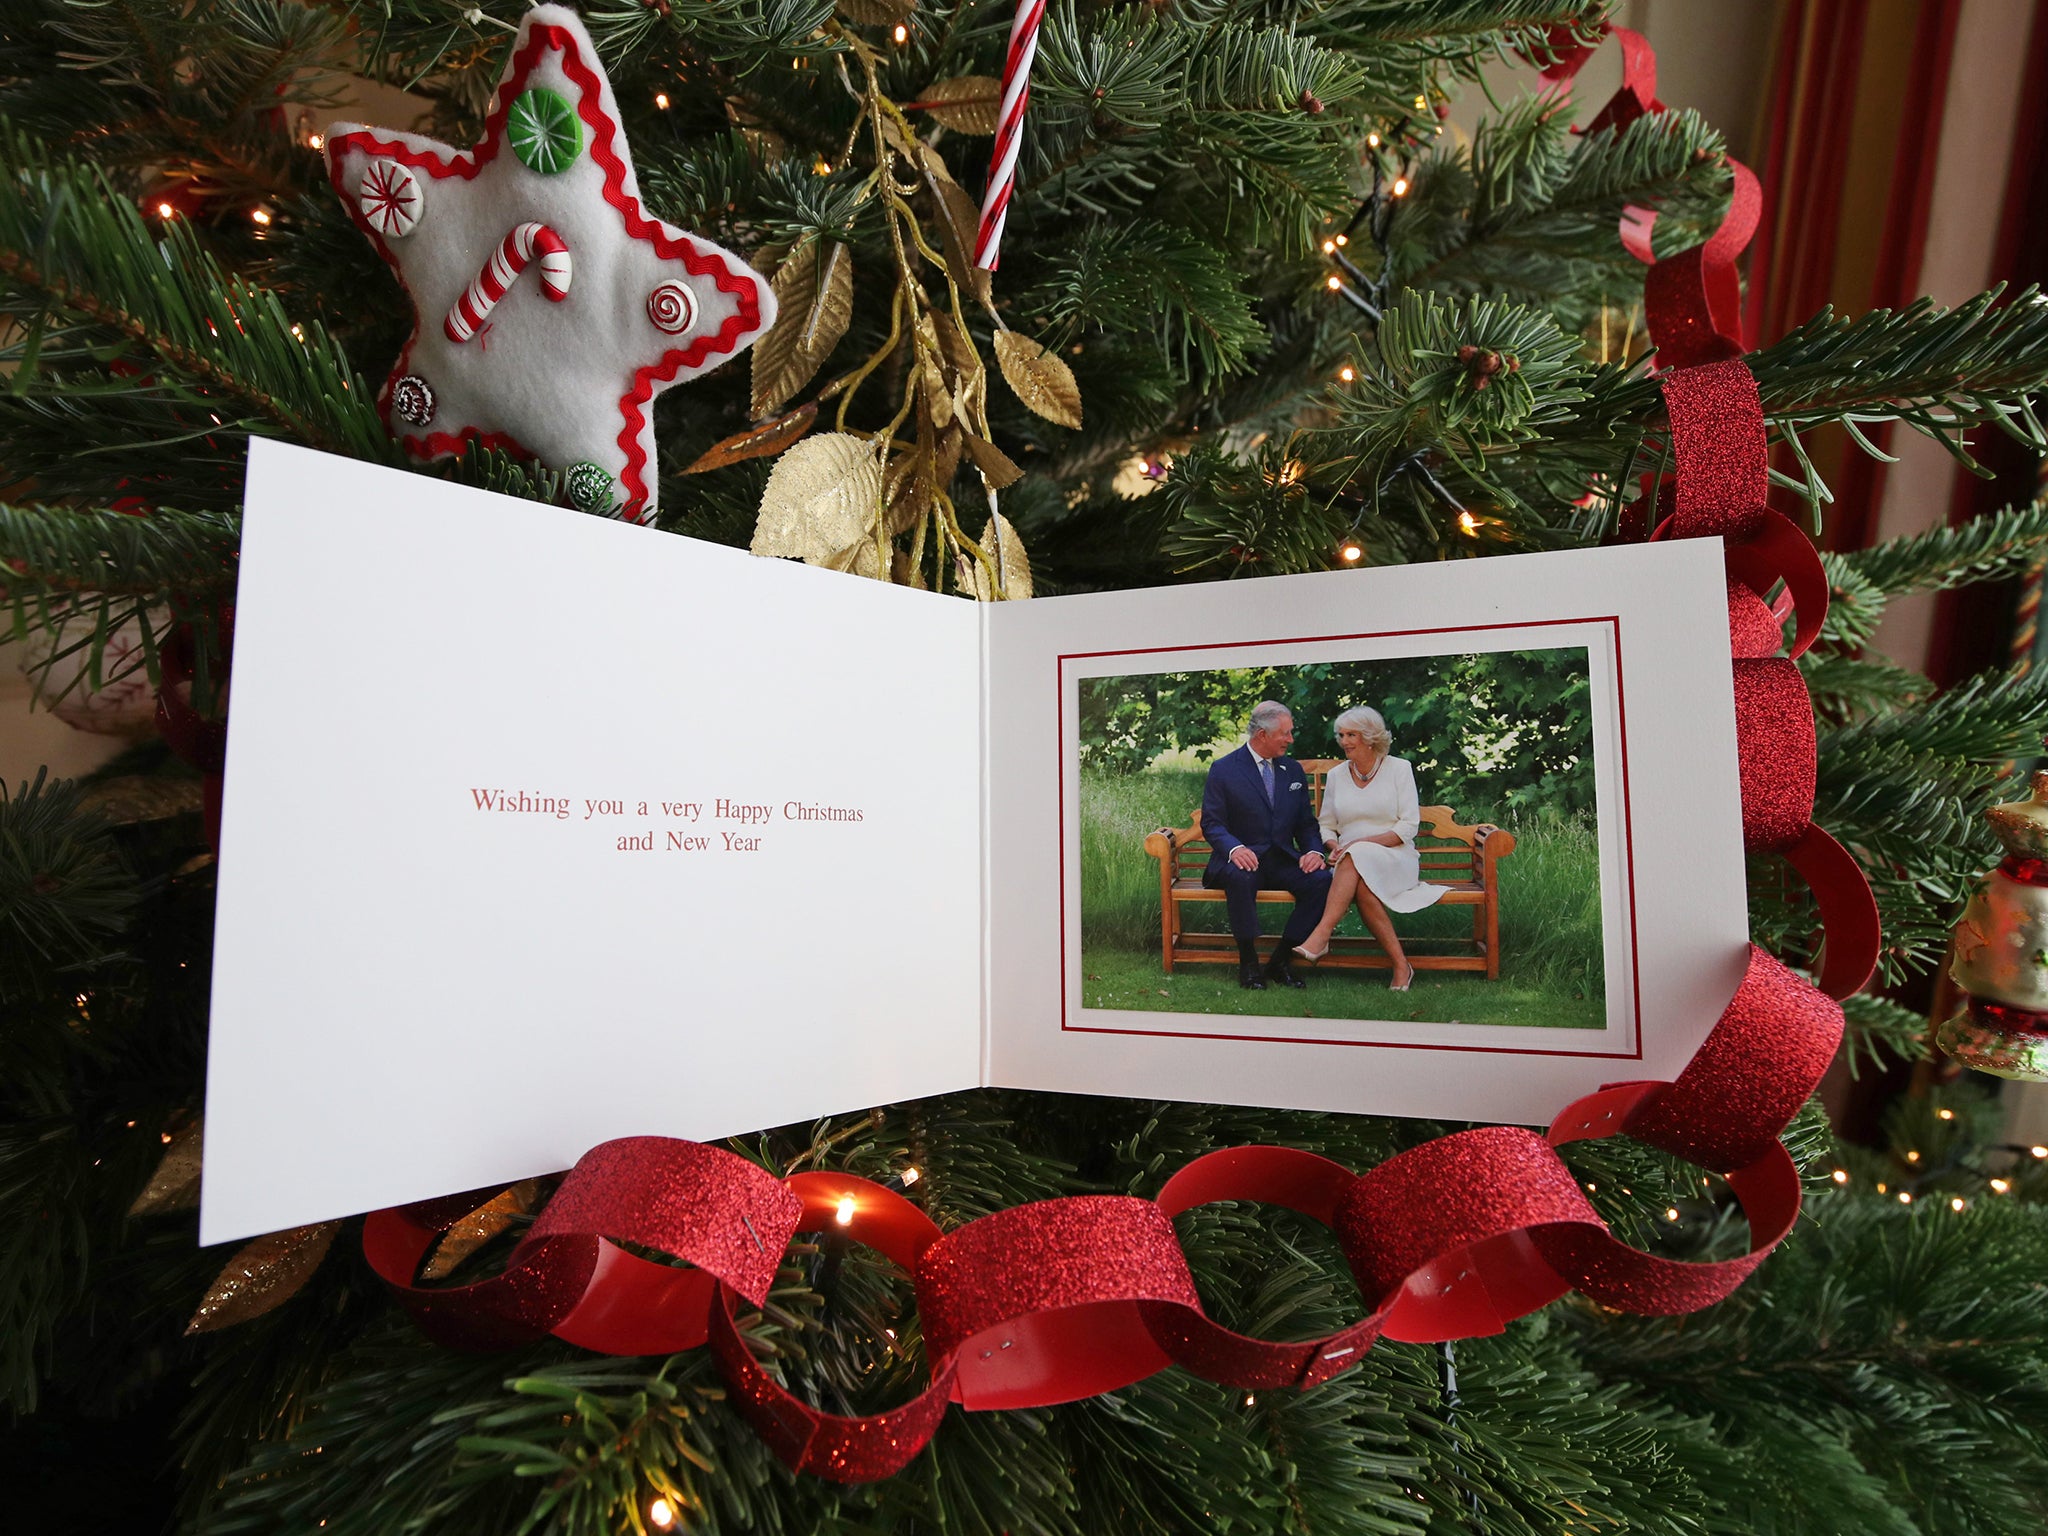 The photograph for Prince Charles and Camilla's 2018 Christmas card was taken by Hugo Burnand